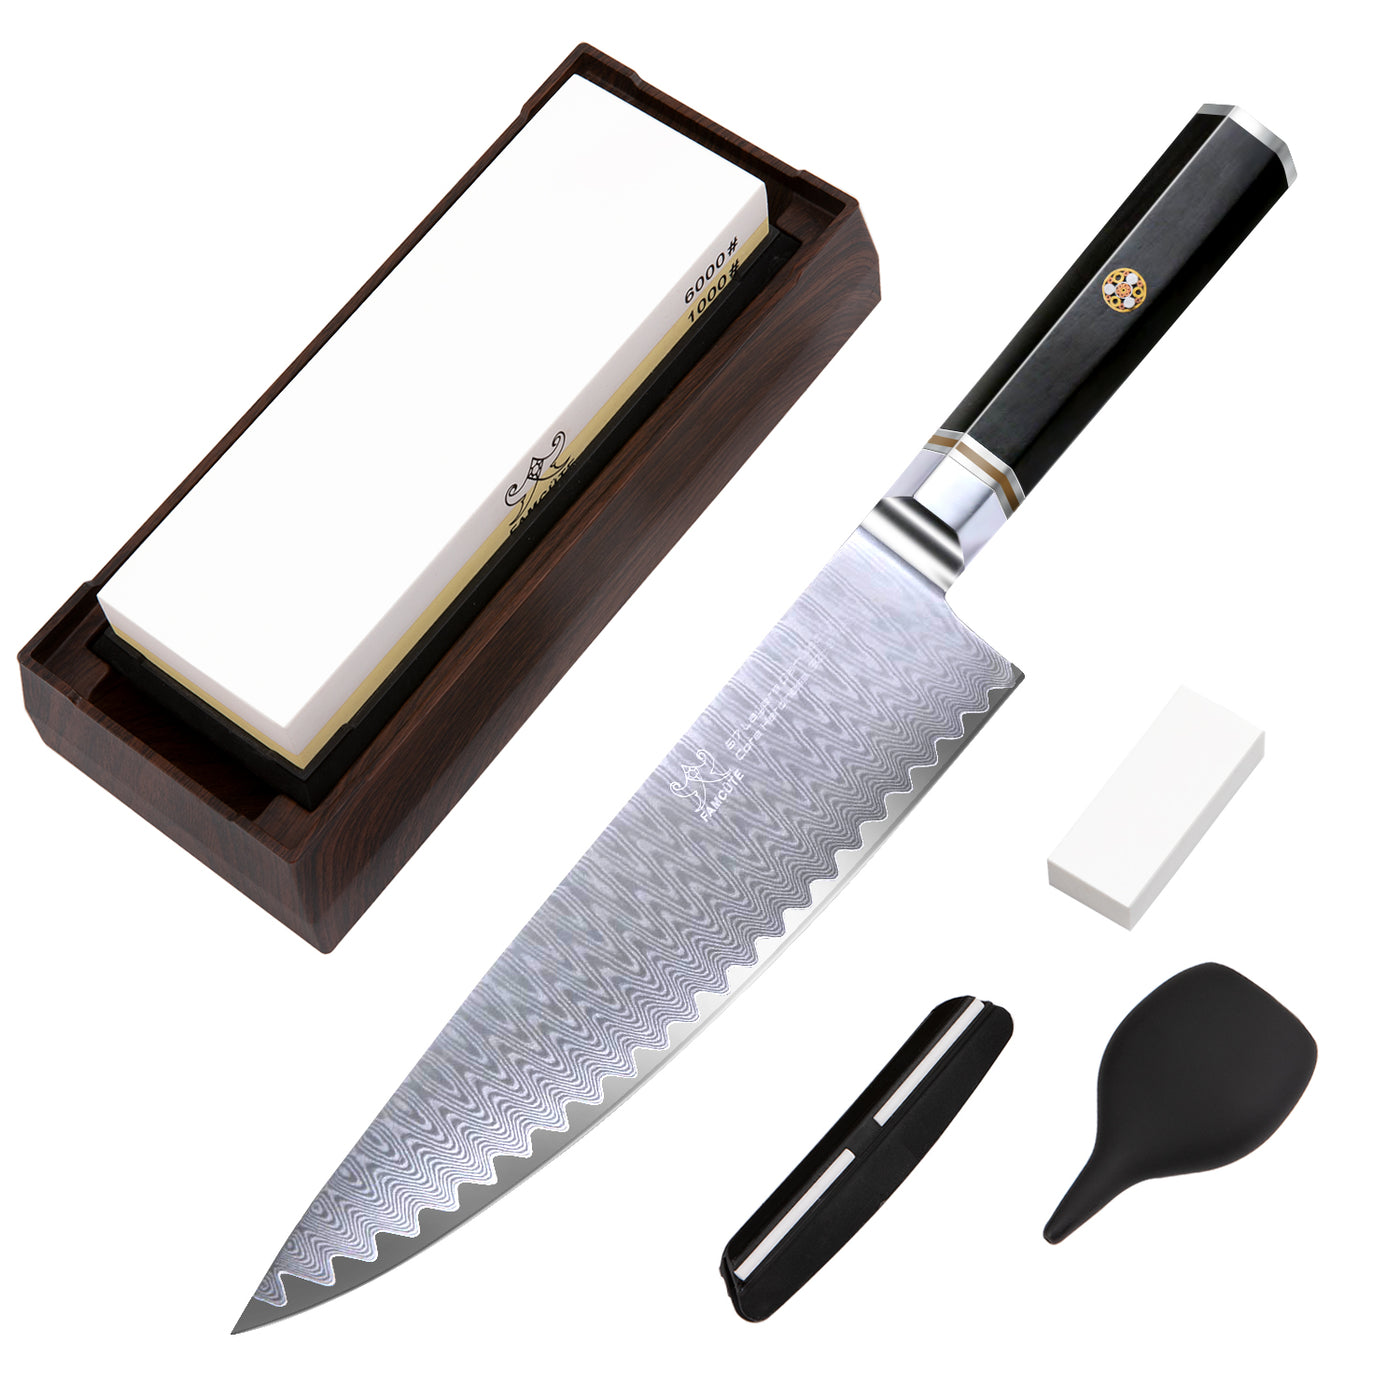 Professional Japanese 67 Layers Damascus Steel Kitchen Knife Set By The  Freakin Rican® - The Freakin Rican Restaurant